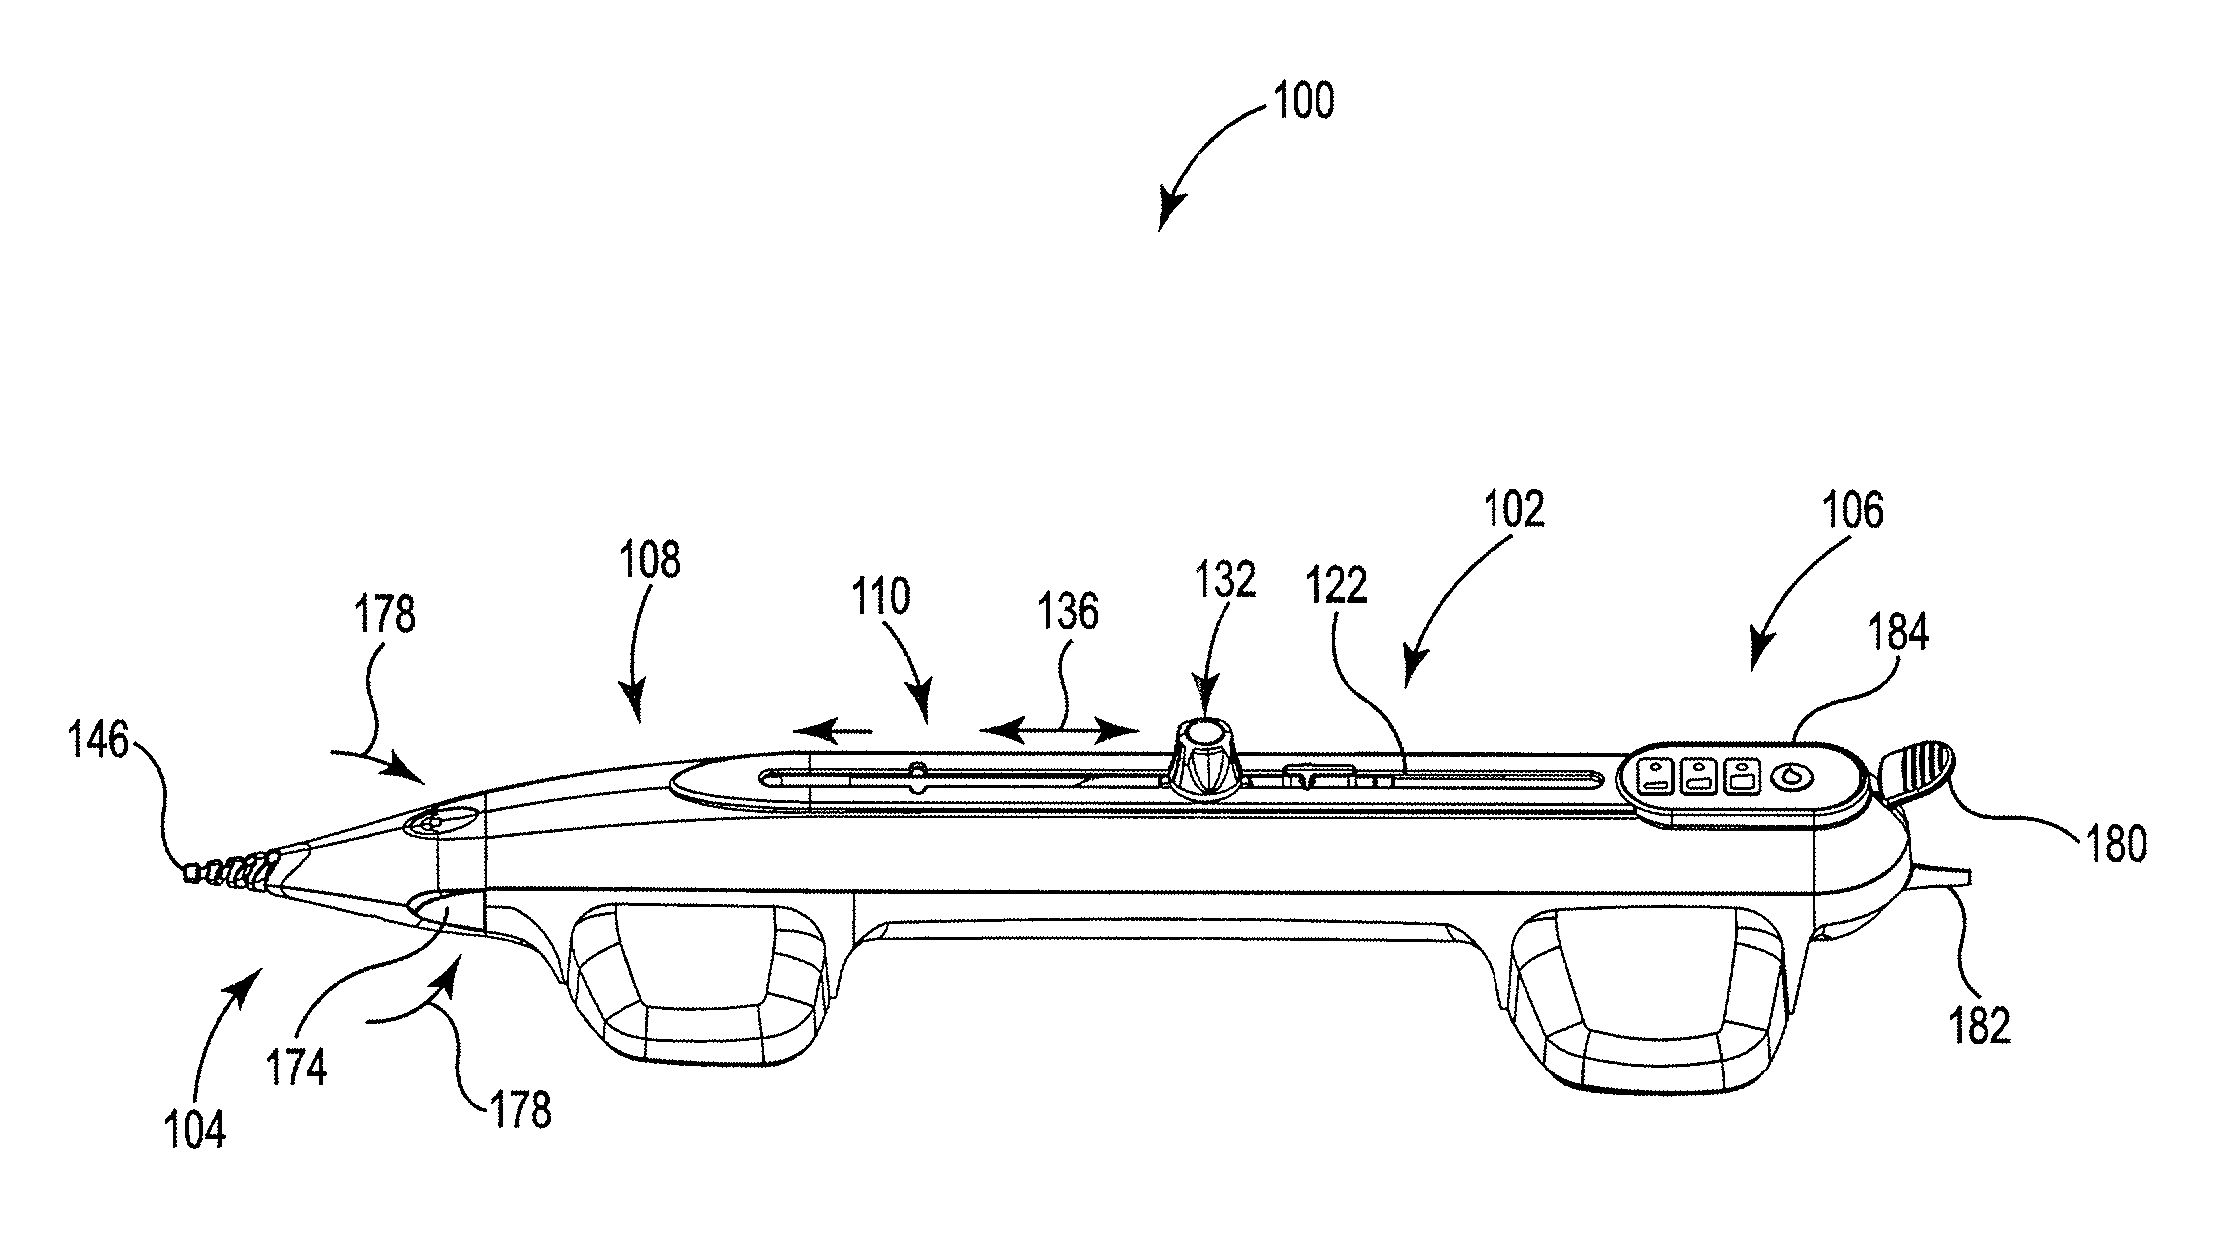 Rotational atherectomy device with exchangeable drive shaft and meshing gears